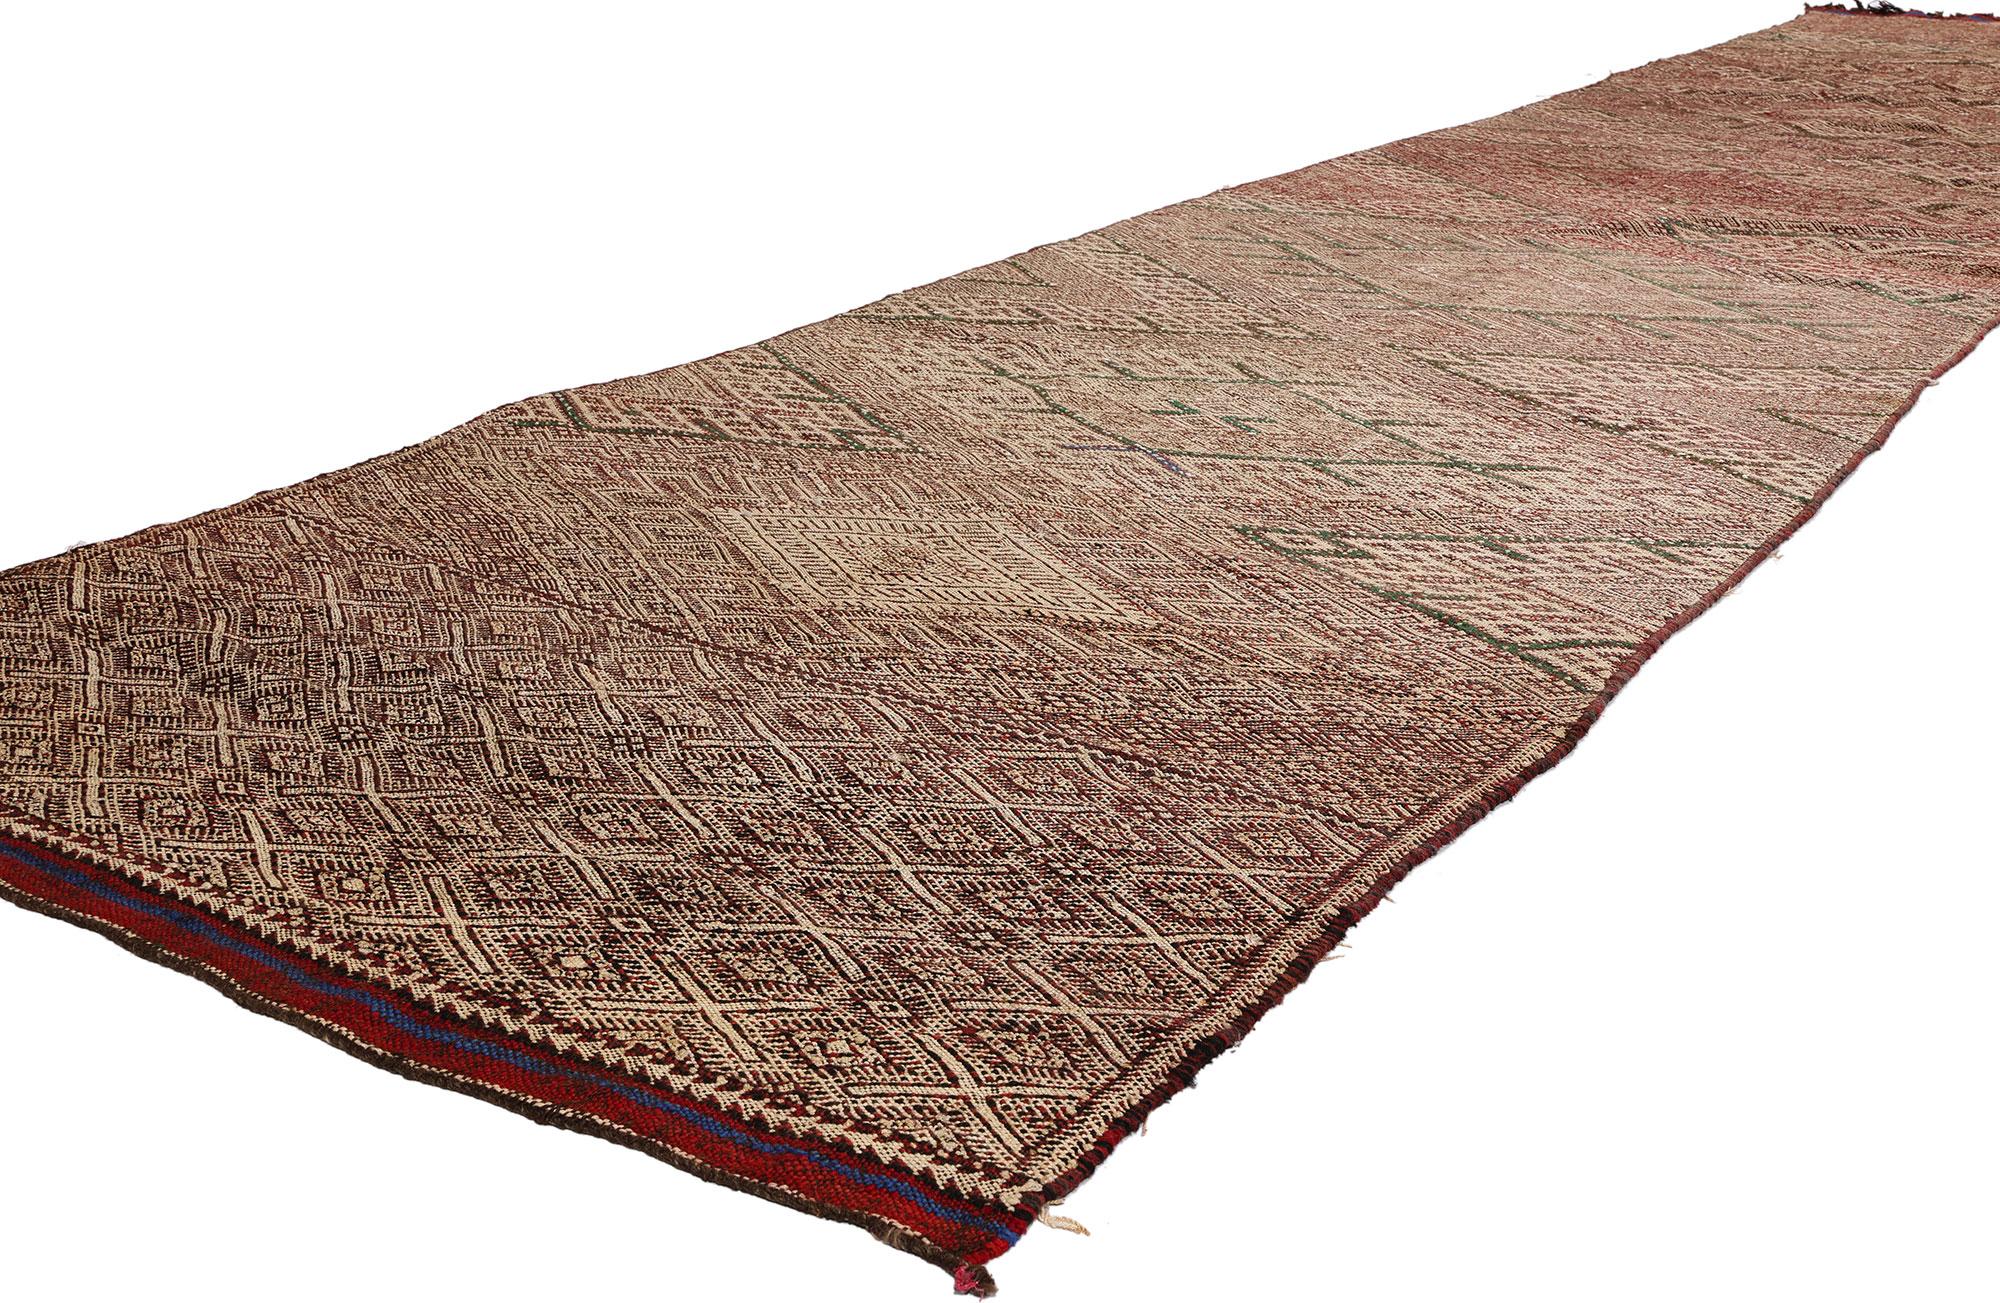 21843 Vintage Zemmour Moroccan Kilim Rug Runner, 03'04 x 17'06. Behold the enchanting tale woven into every fiber of this bohemian-inspired marvel – a handwoven wool Moroccan kilim rug runner, crafted by the skilled hands of the Zemmour Tribe,